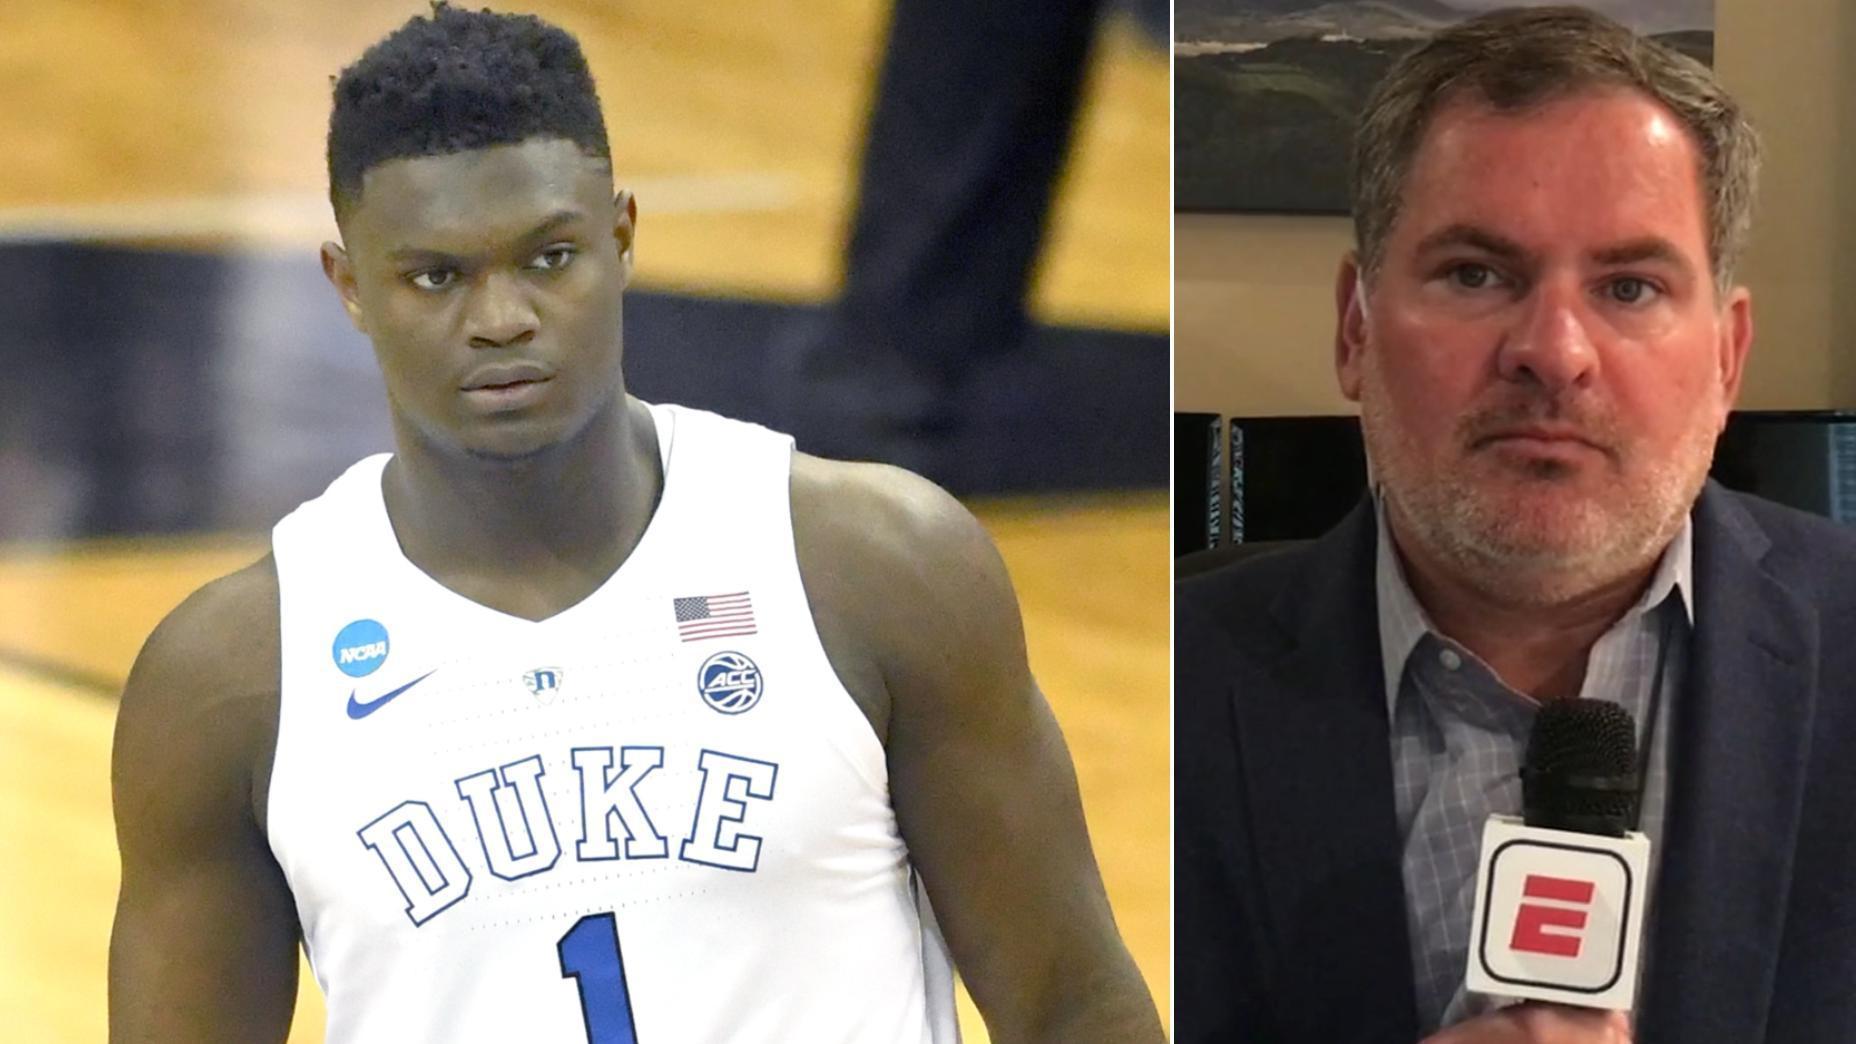 Will Zion be required to address gift allegations?